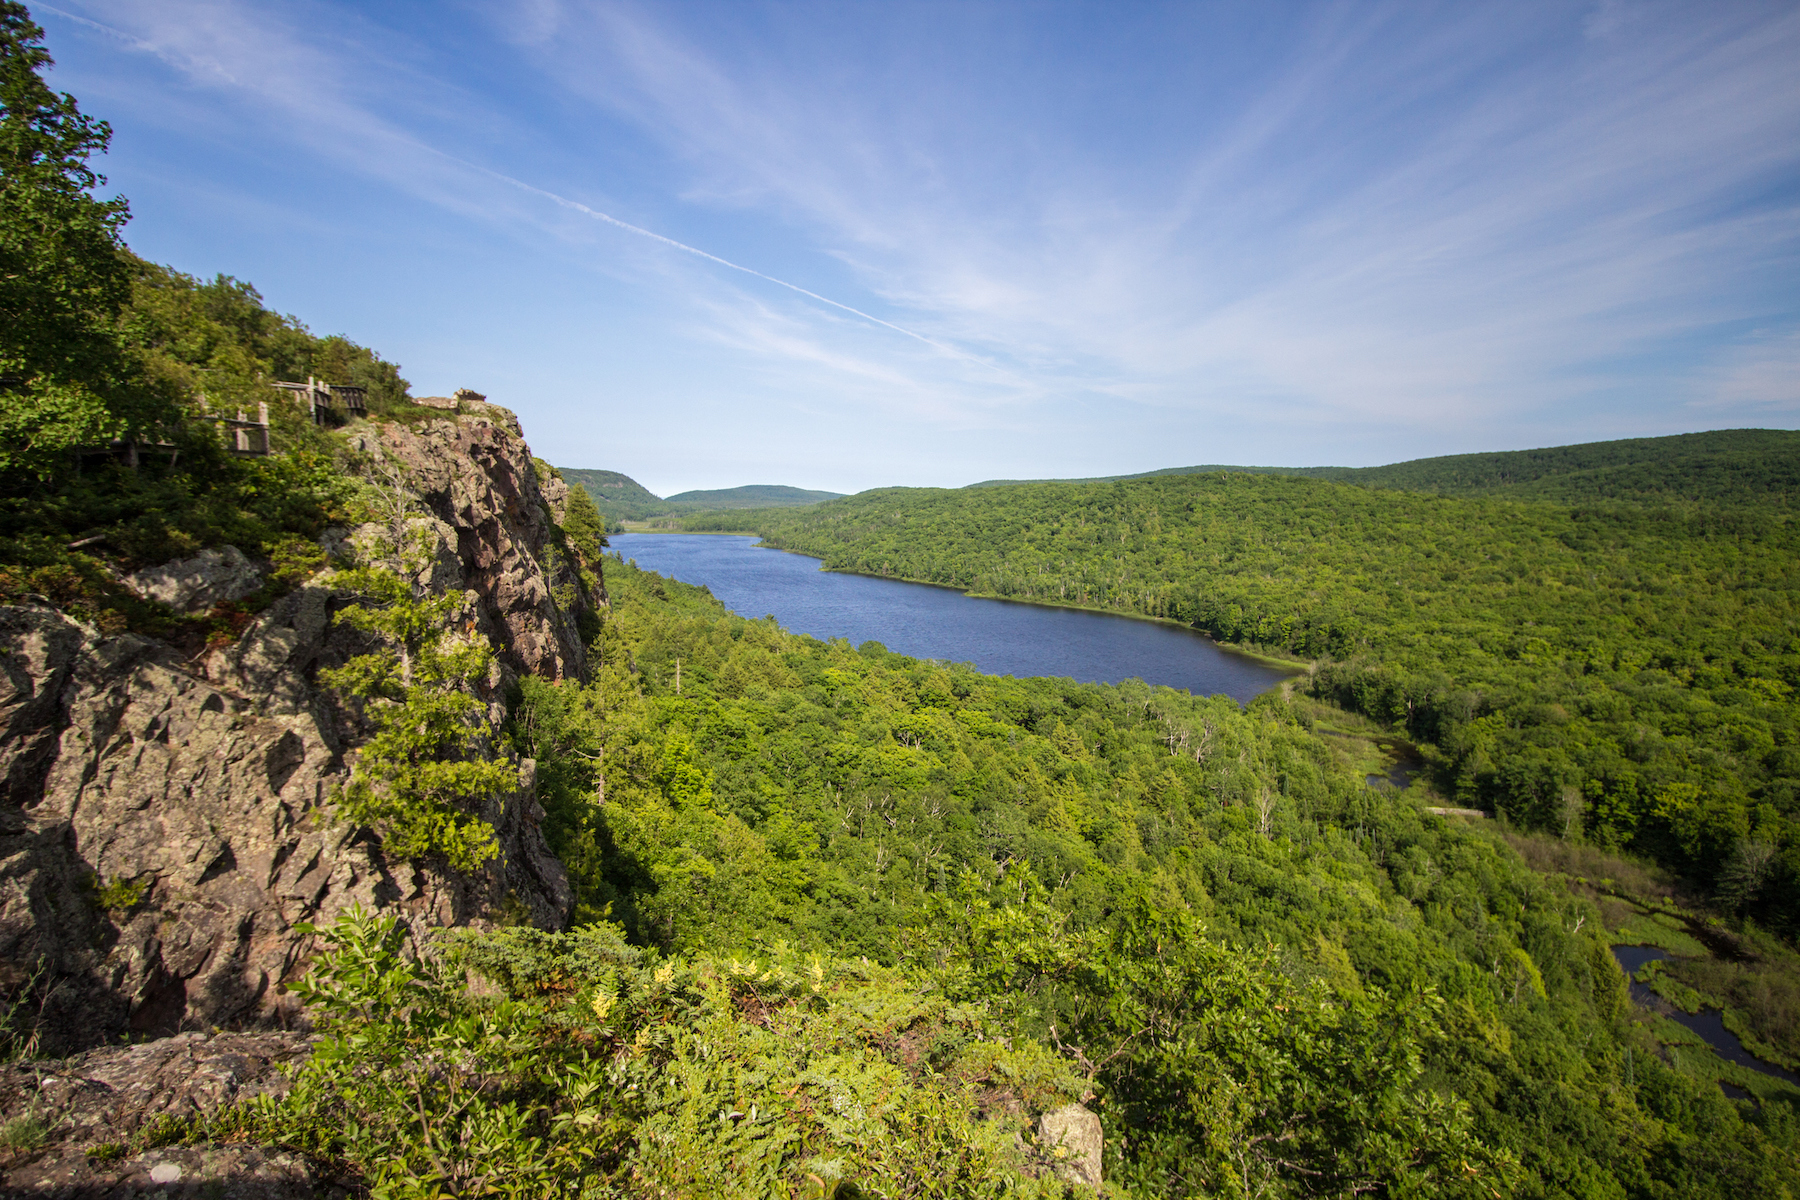 Lake of the Clouds is one of the most famous natural landmarks in Michigan. It is located in the Upper Peninsula's Porcupine Mountains State Park which is the largest state park in the American Midwest.